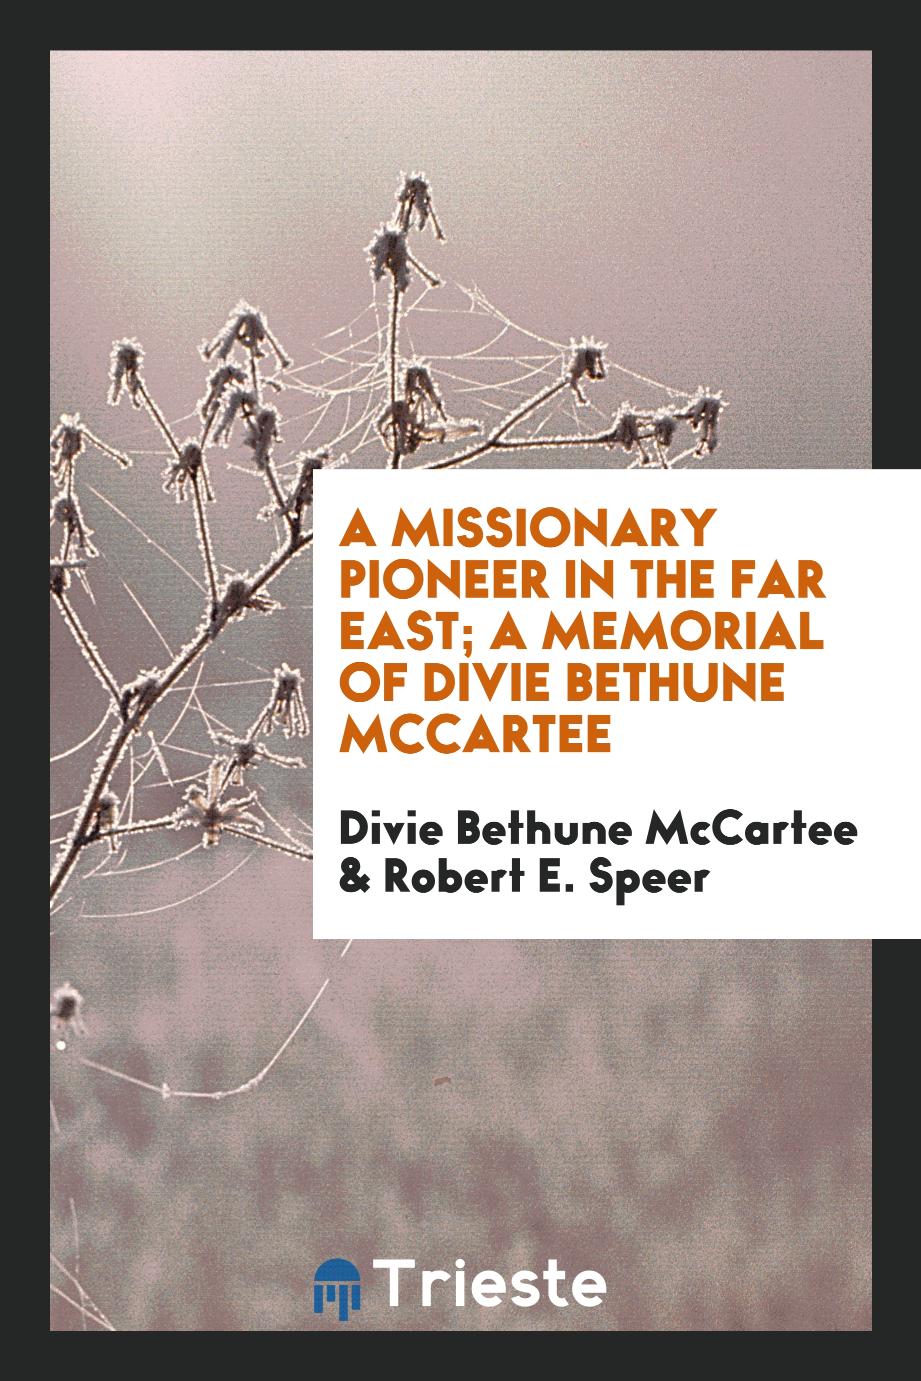 A missionary pioneer in the Far East; a memorial of Divie Bethune McCartee